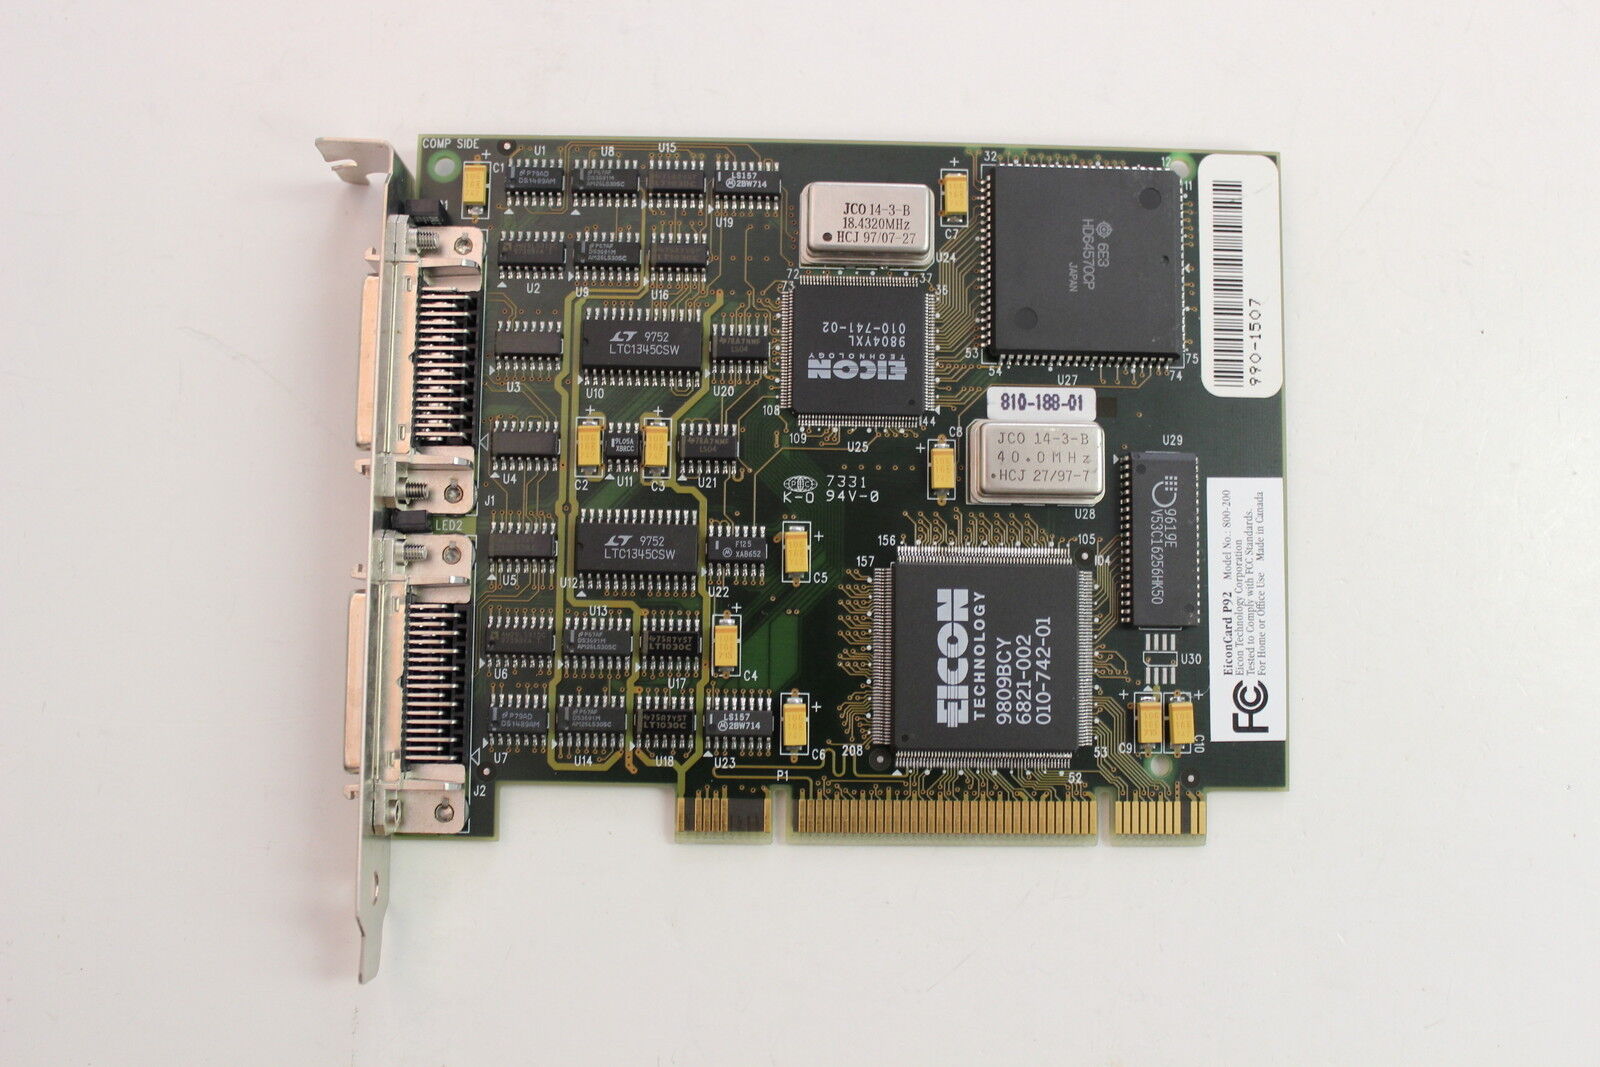 EICON TECHNOLOGY 800-200 EICONCARD P92 PCI ADAPTER 810-188-01 WITH WARRANTY